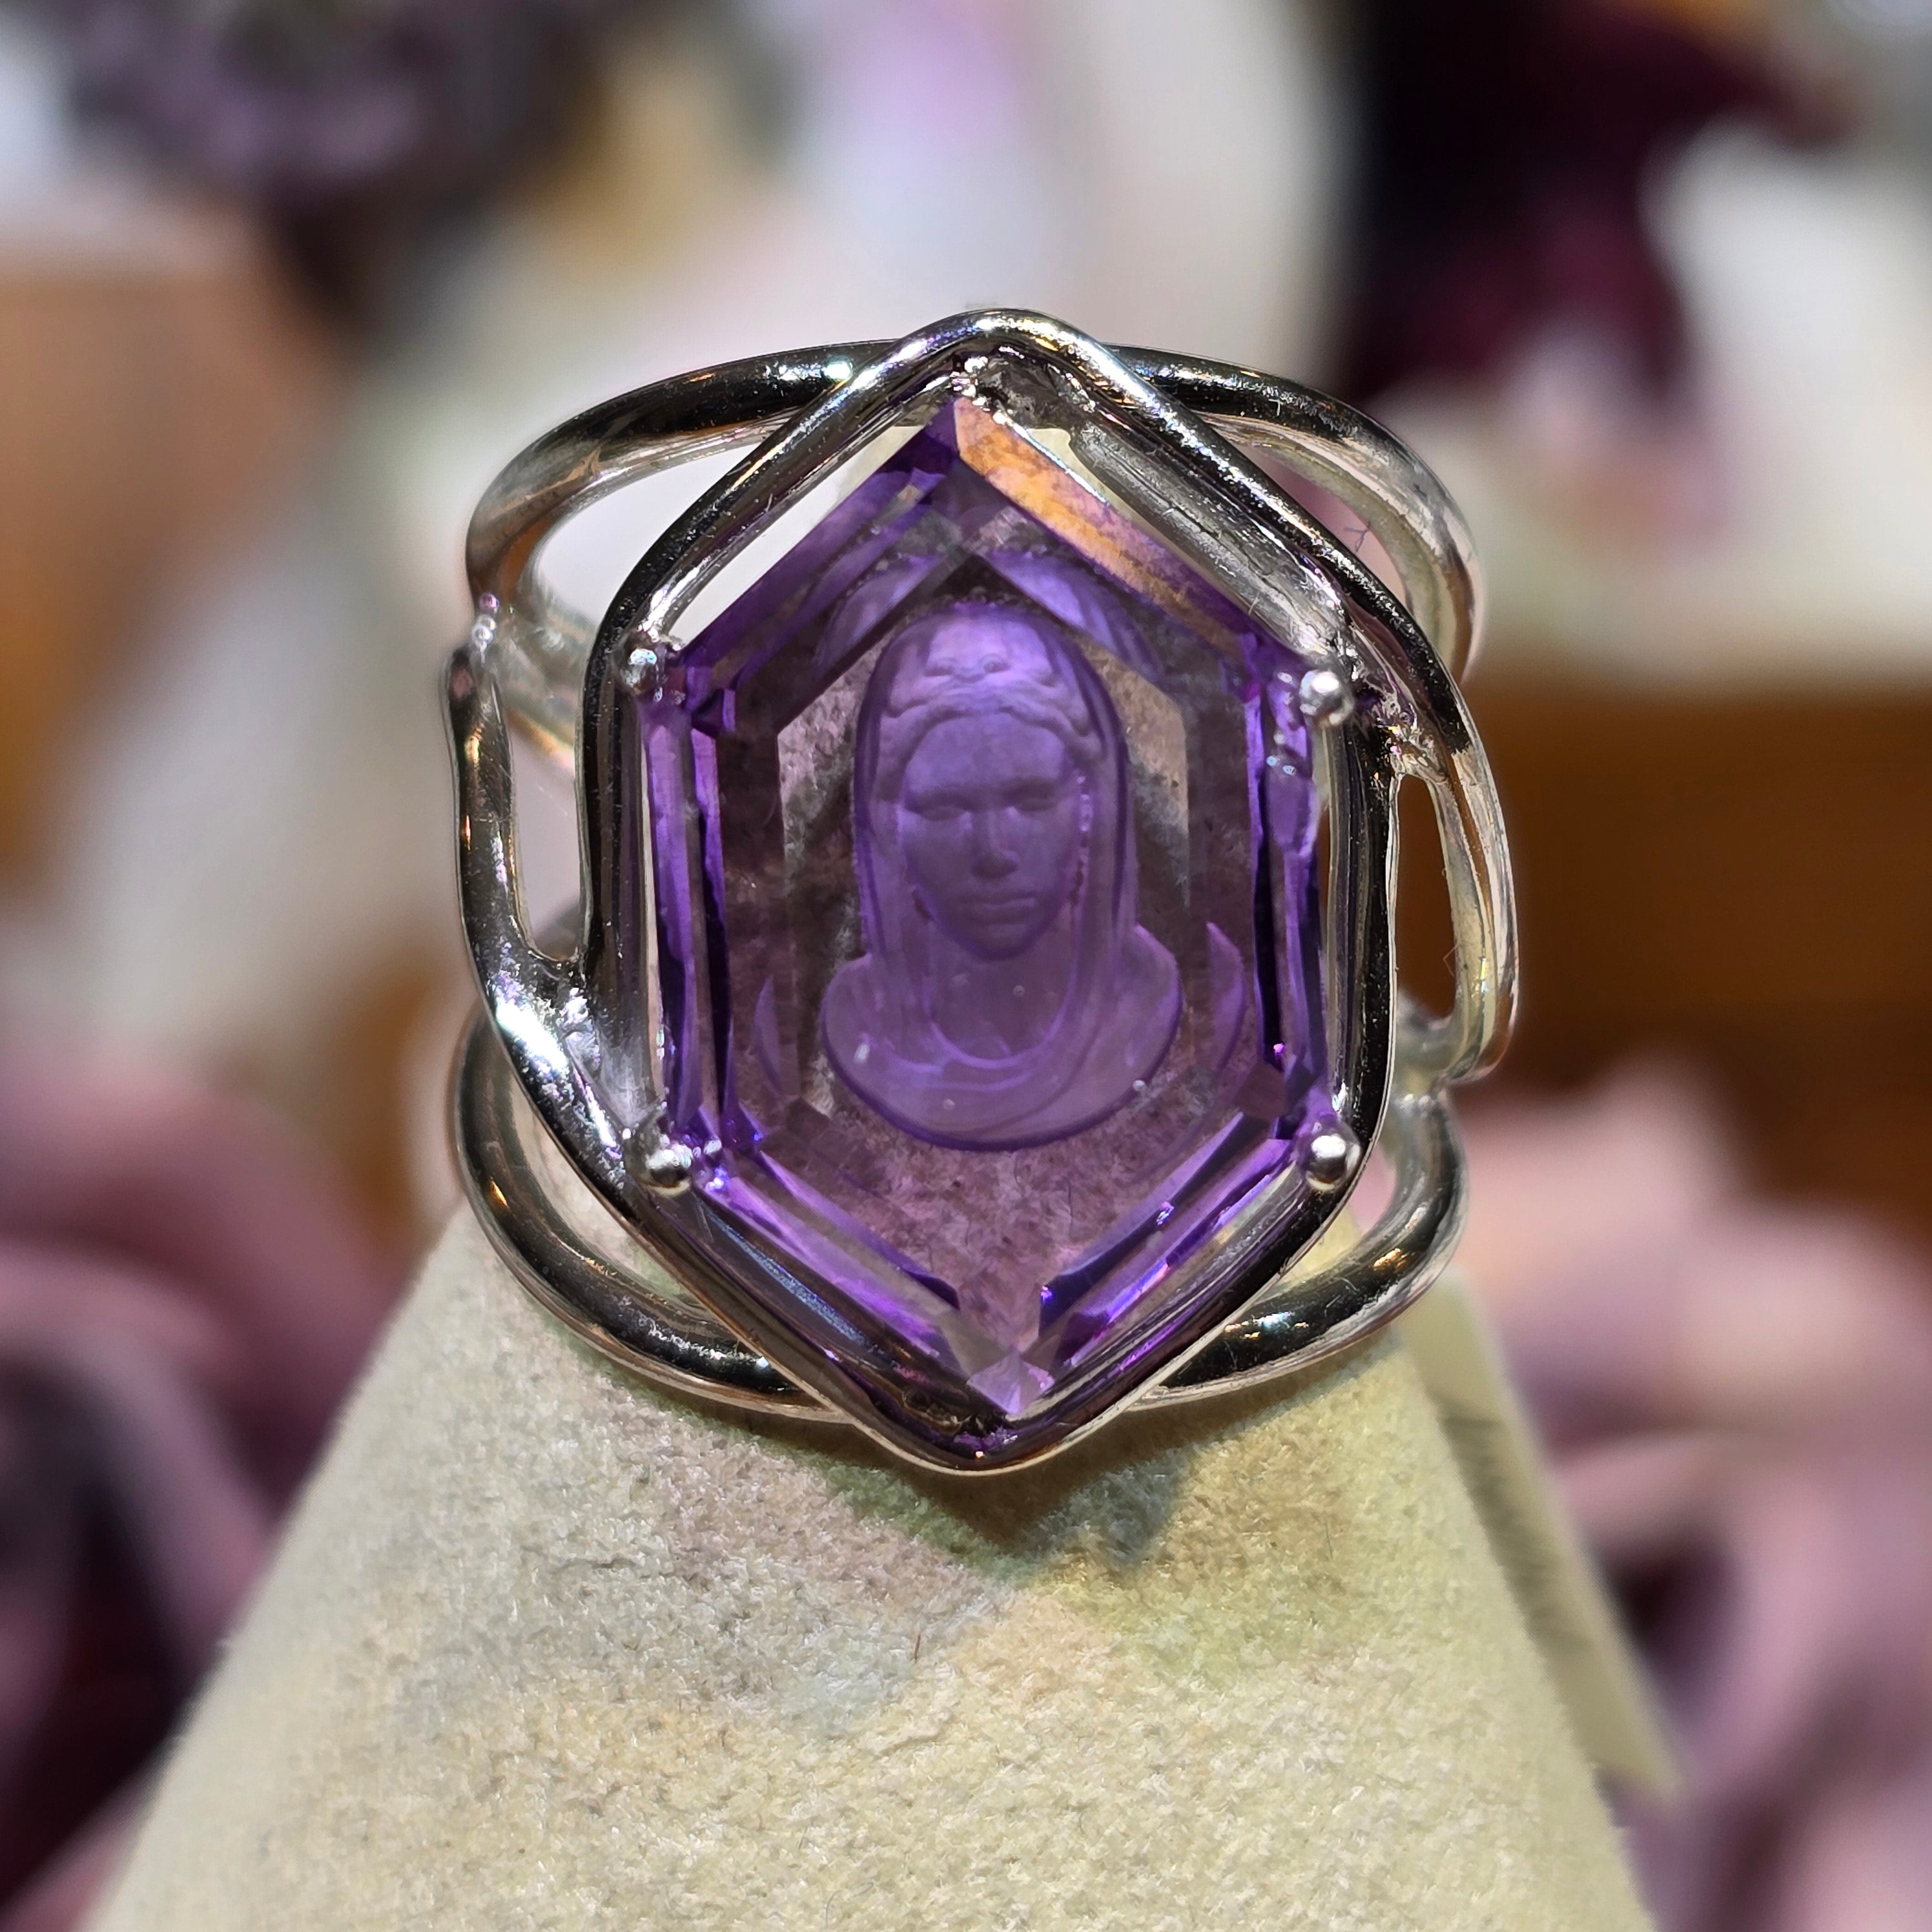 Amethyst Mother Mary Finger Cuff Adjustable Ring .925 Silver for Divine Connection and Energy Purification